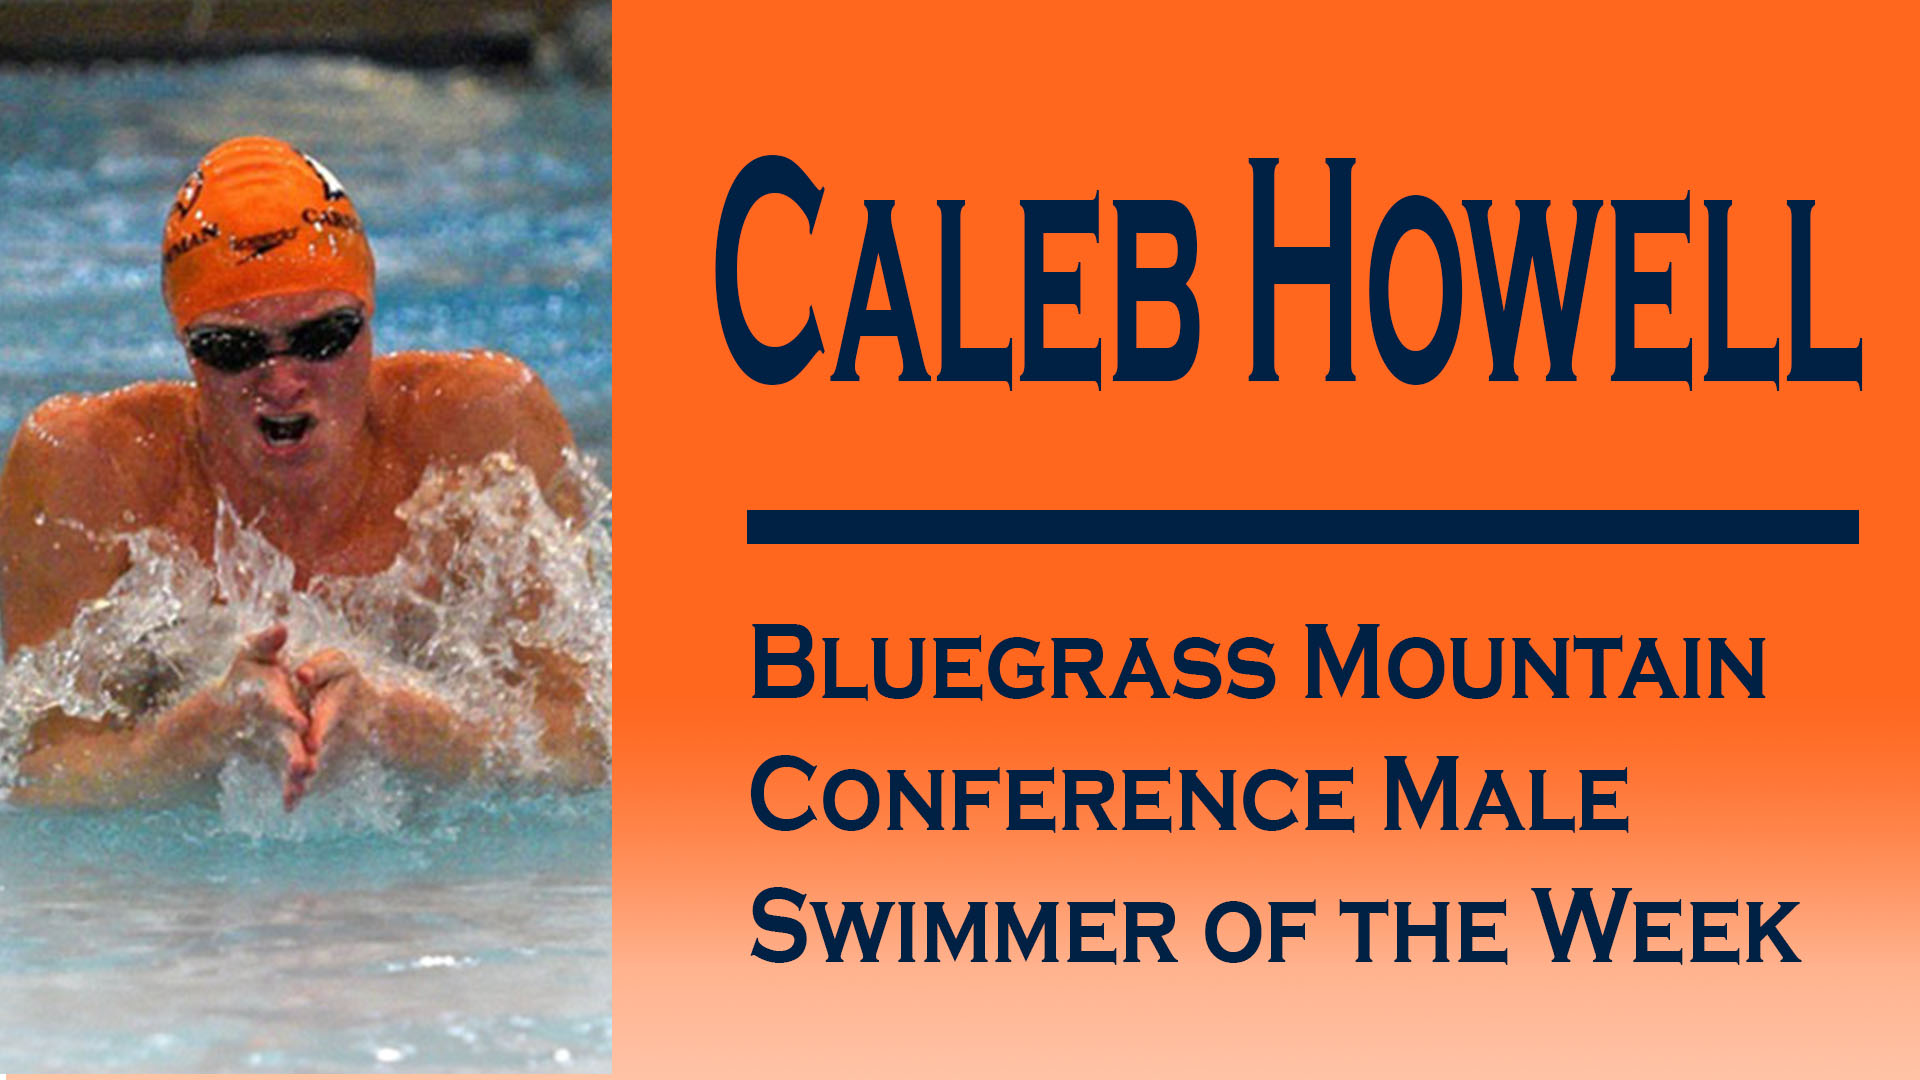 Howell Receives Third Bluegrass Mountain Conference Male Swimmer of the Week Award